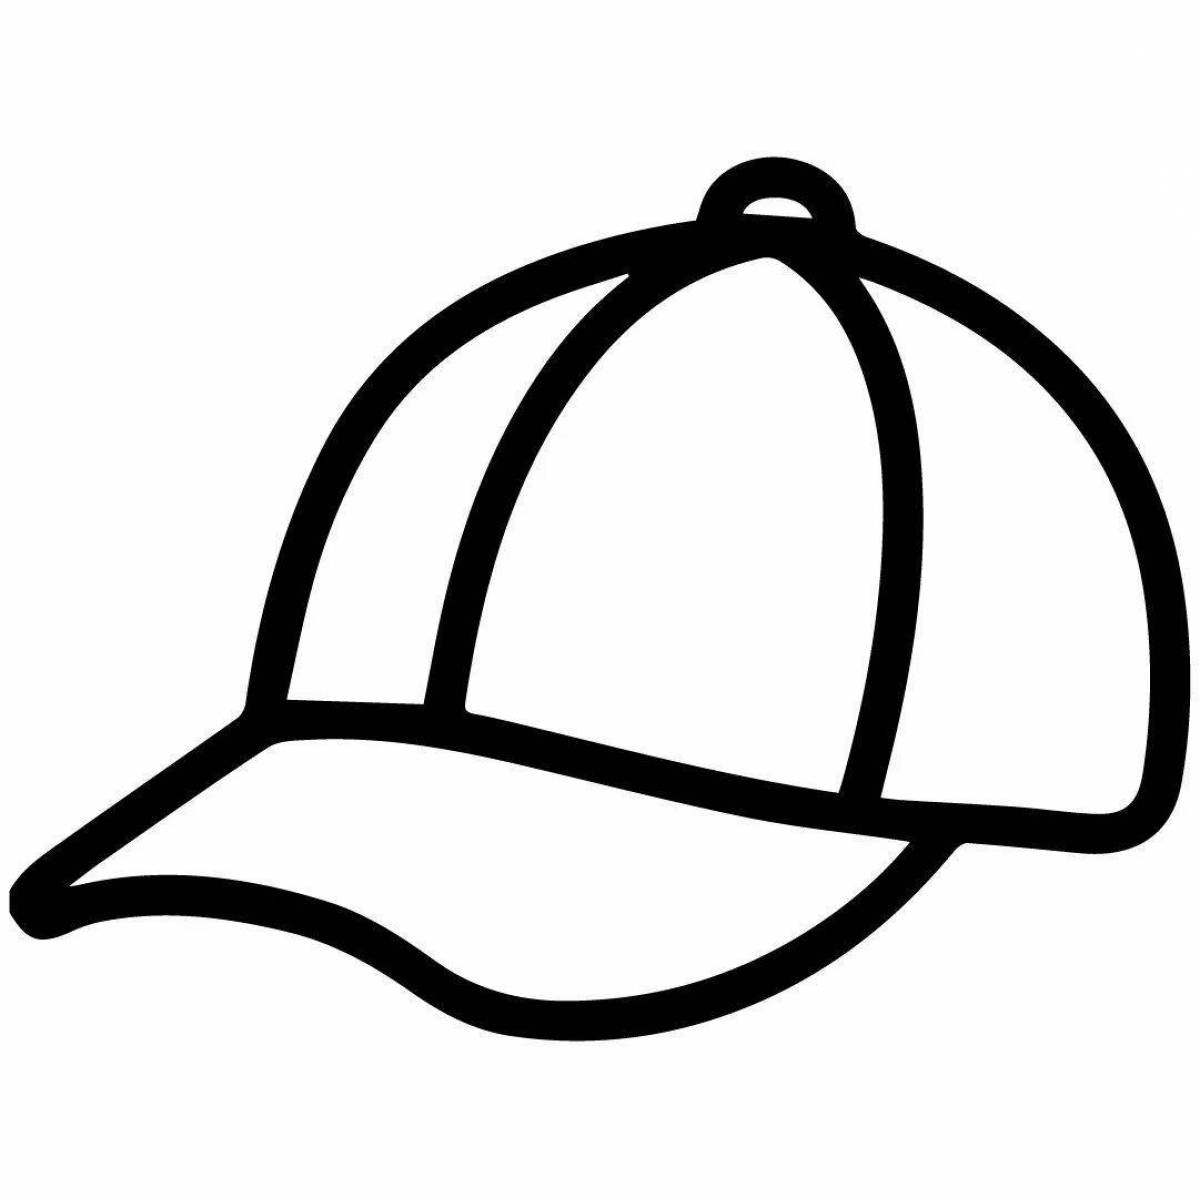 Coloring page stylish cap for kids